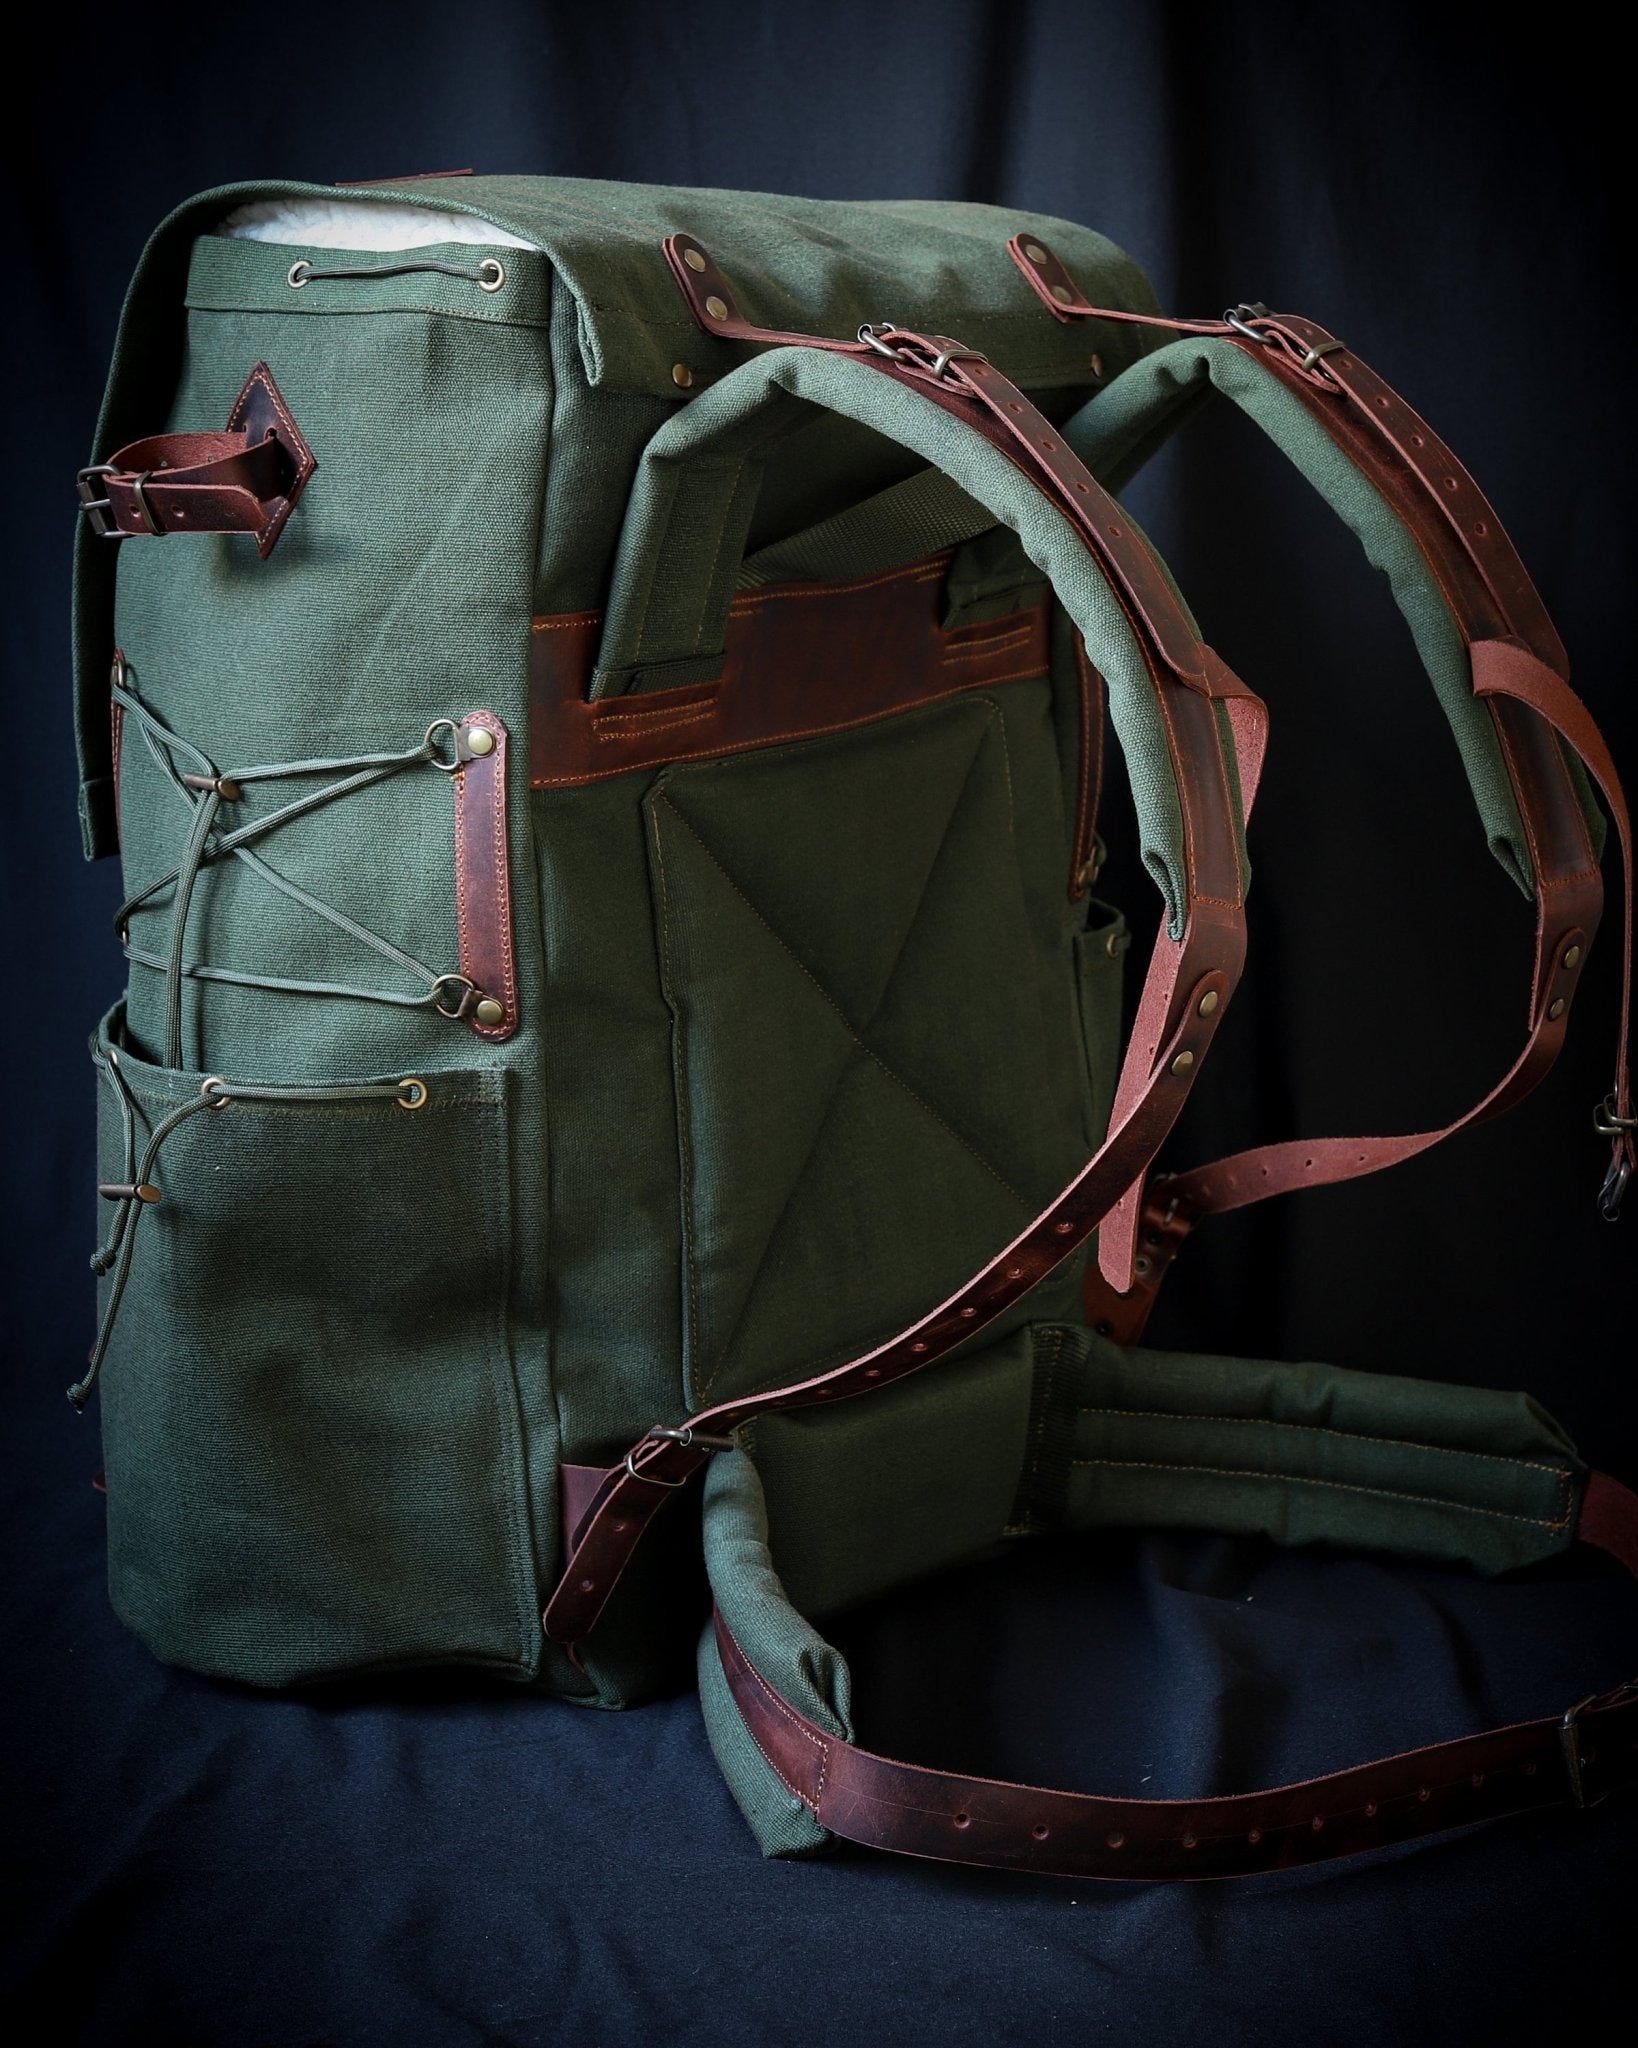 80 L | Bushcraft Backpack | Camping Backack | Green, Brown, Dhaki Colours | Handmade Leather, Canvas Backpack for Travel, Camping, Bushcraft  99percenthandmade Khaki Green 30 Liters 